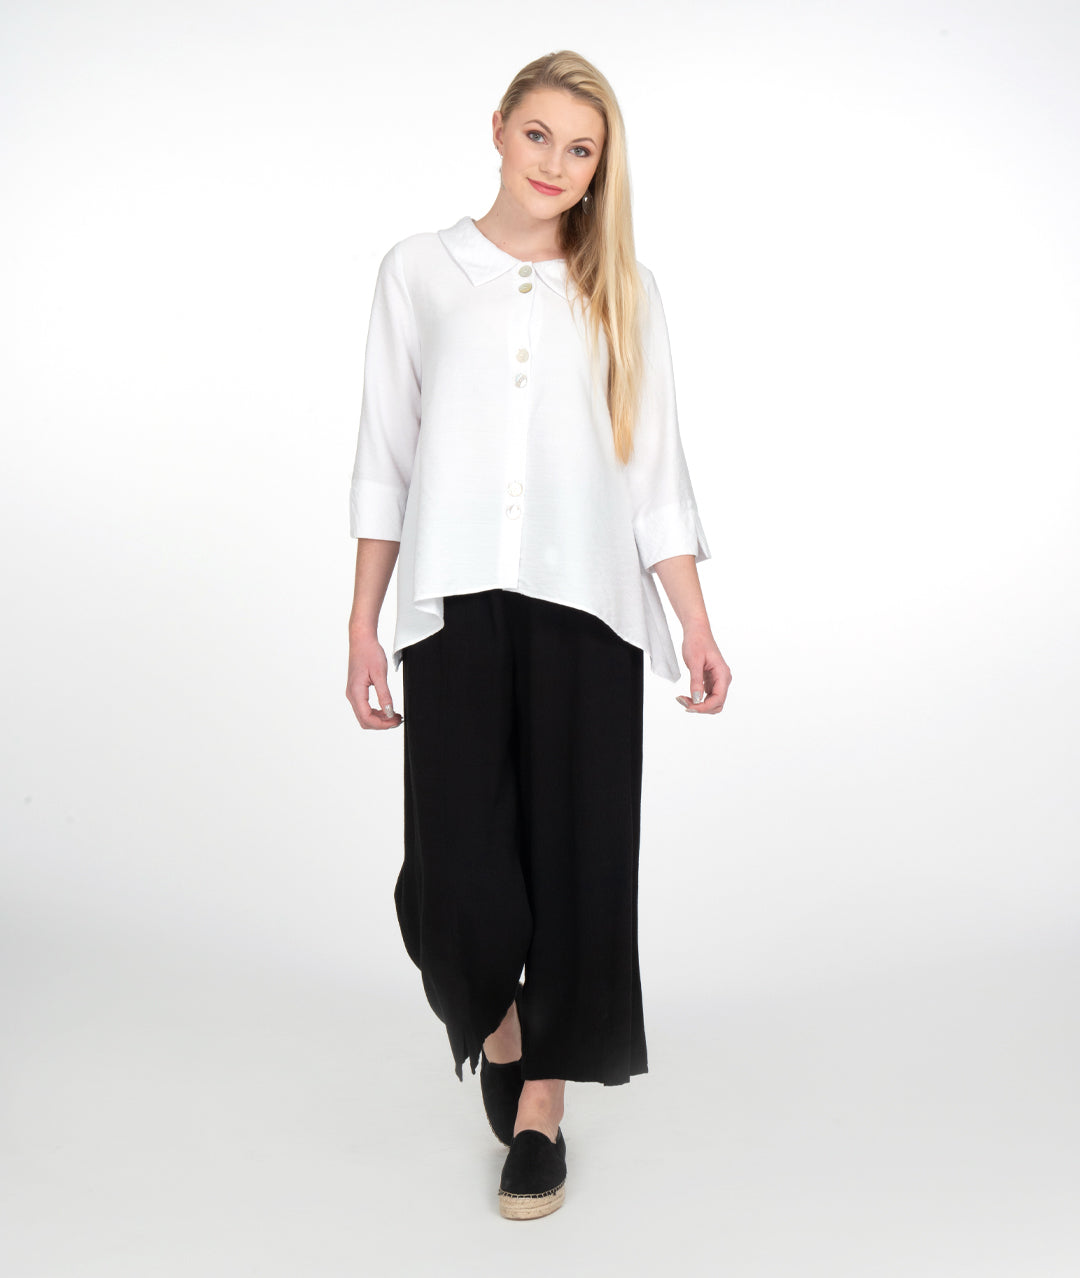 model in a wide leg black pant with a white button up blouse